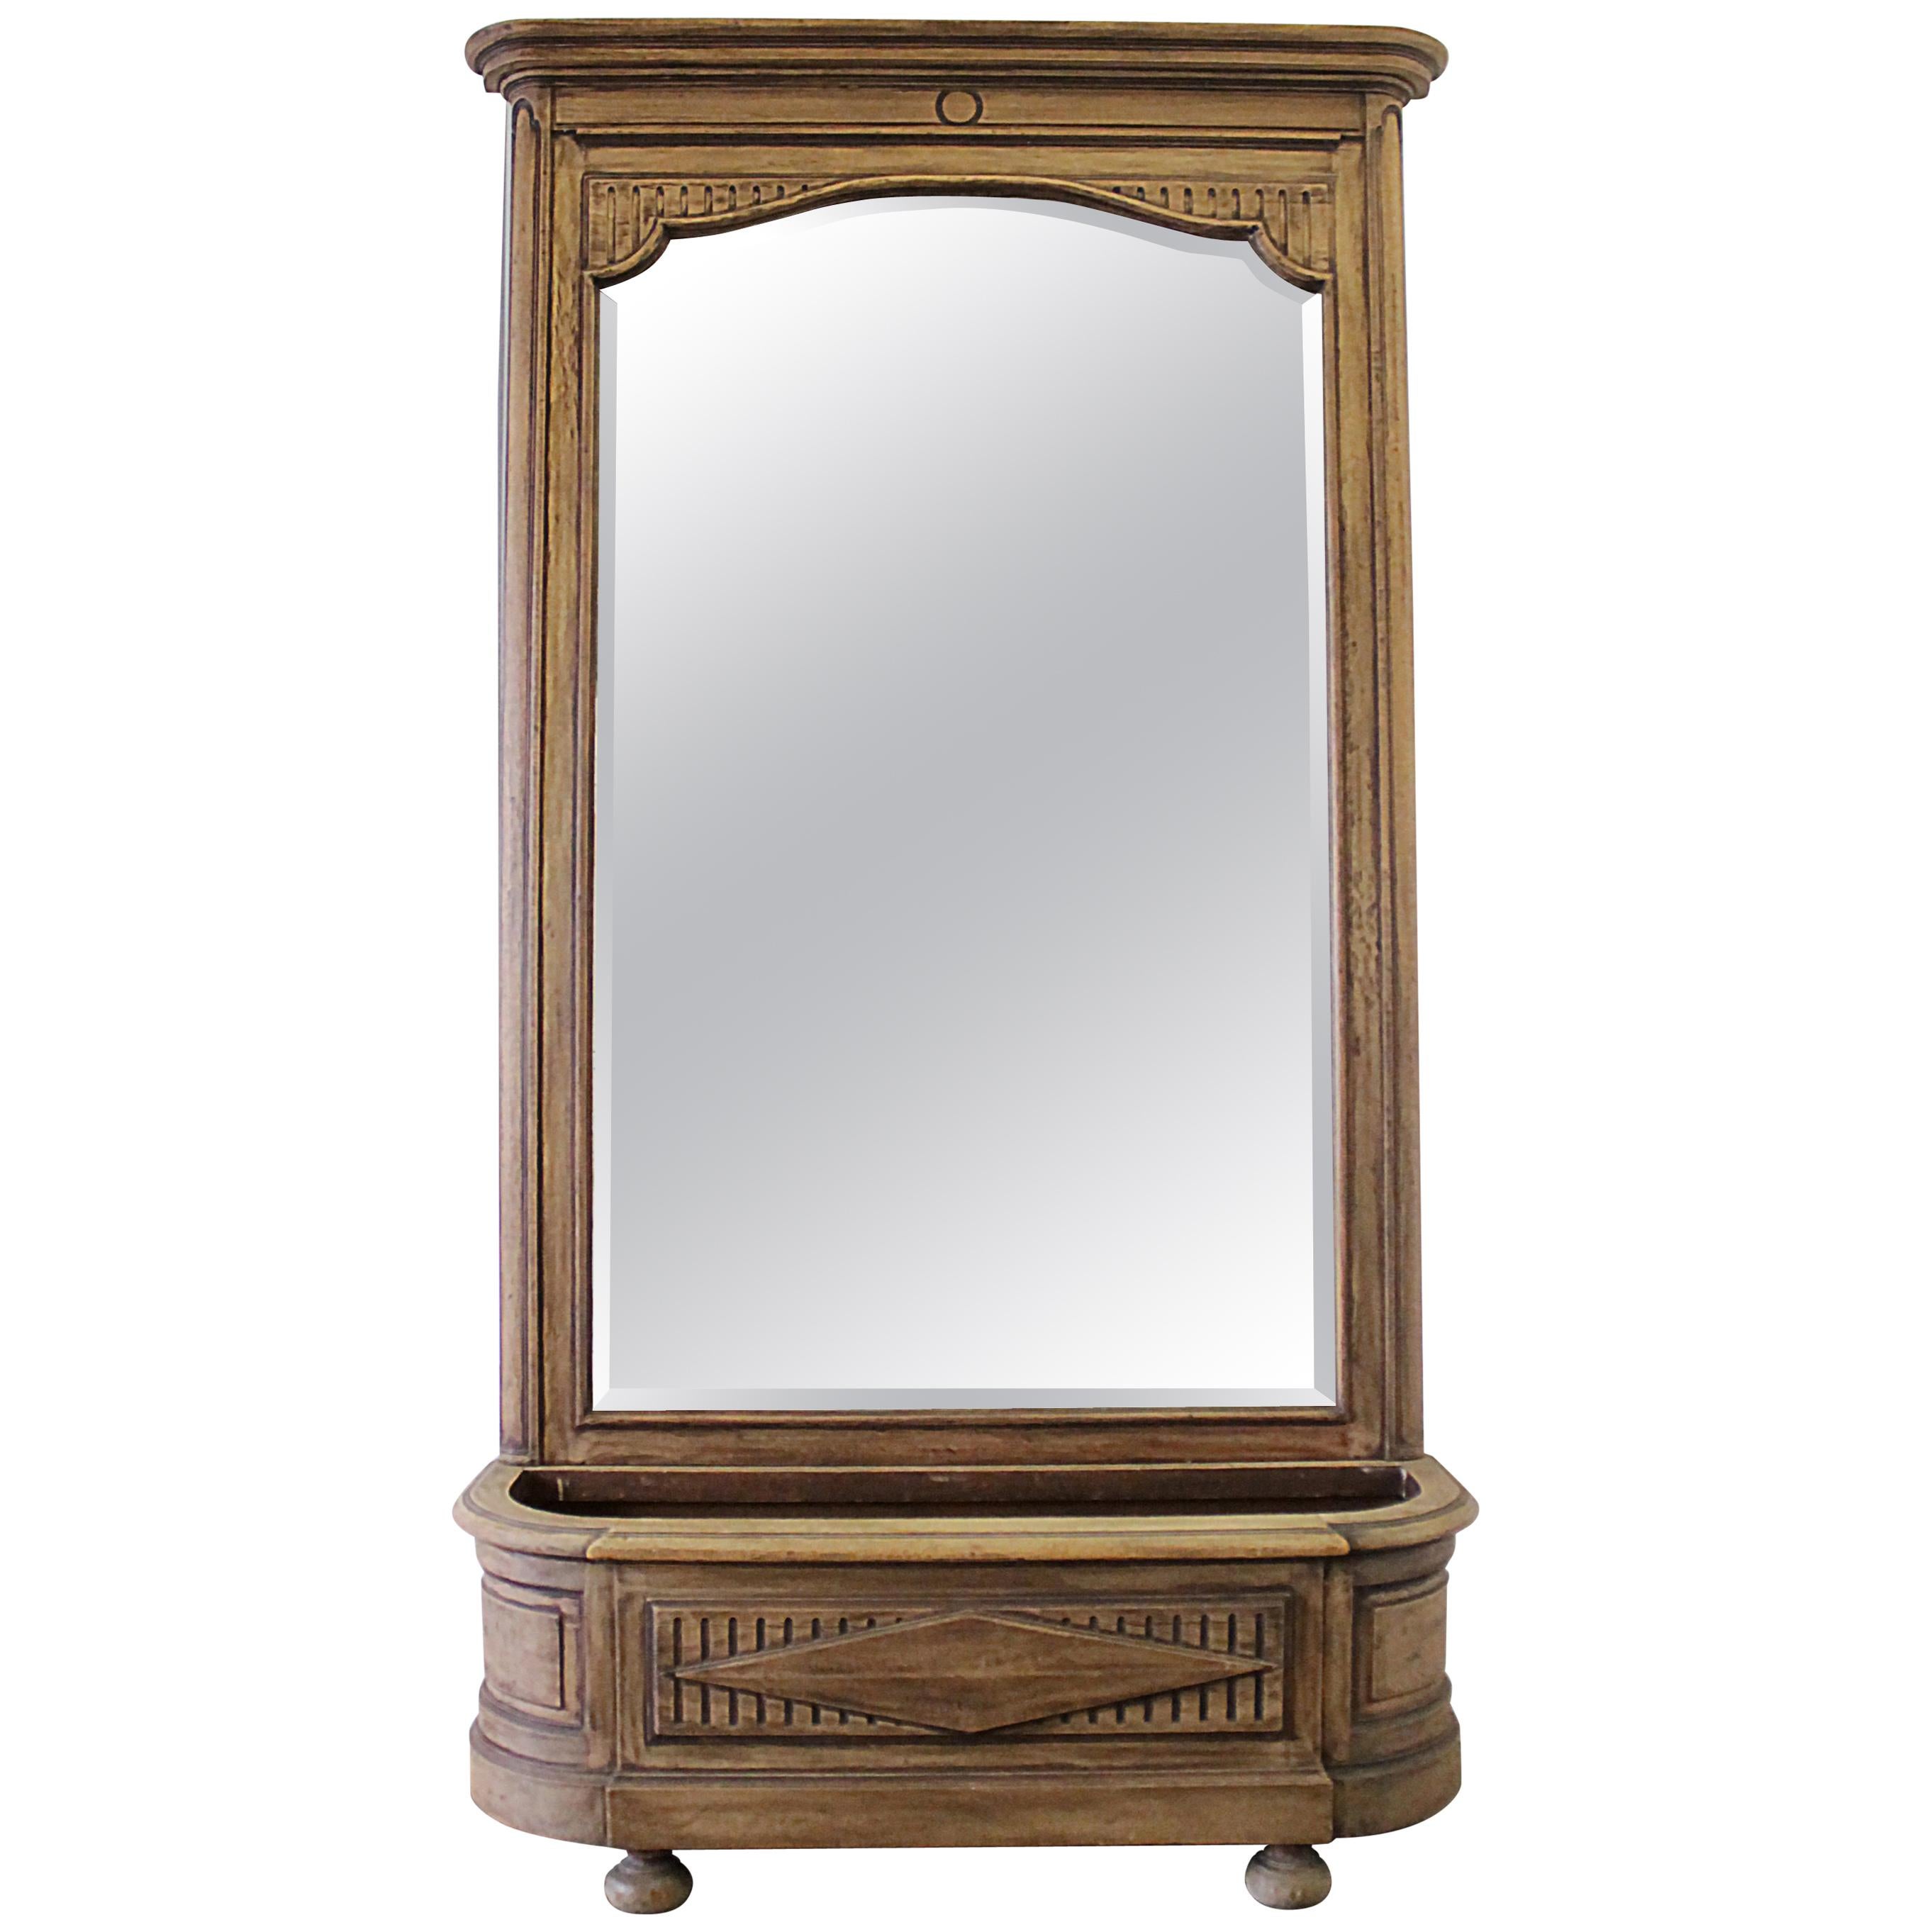 Early 20th Century Italian Trumeau Mirror with Planter Stand For Sale